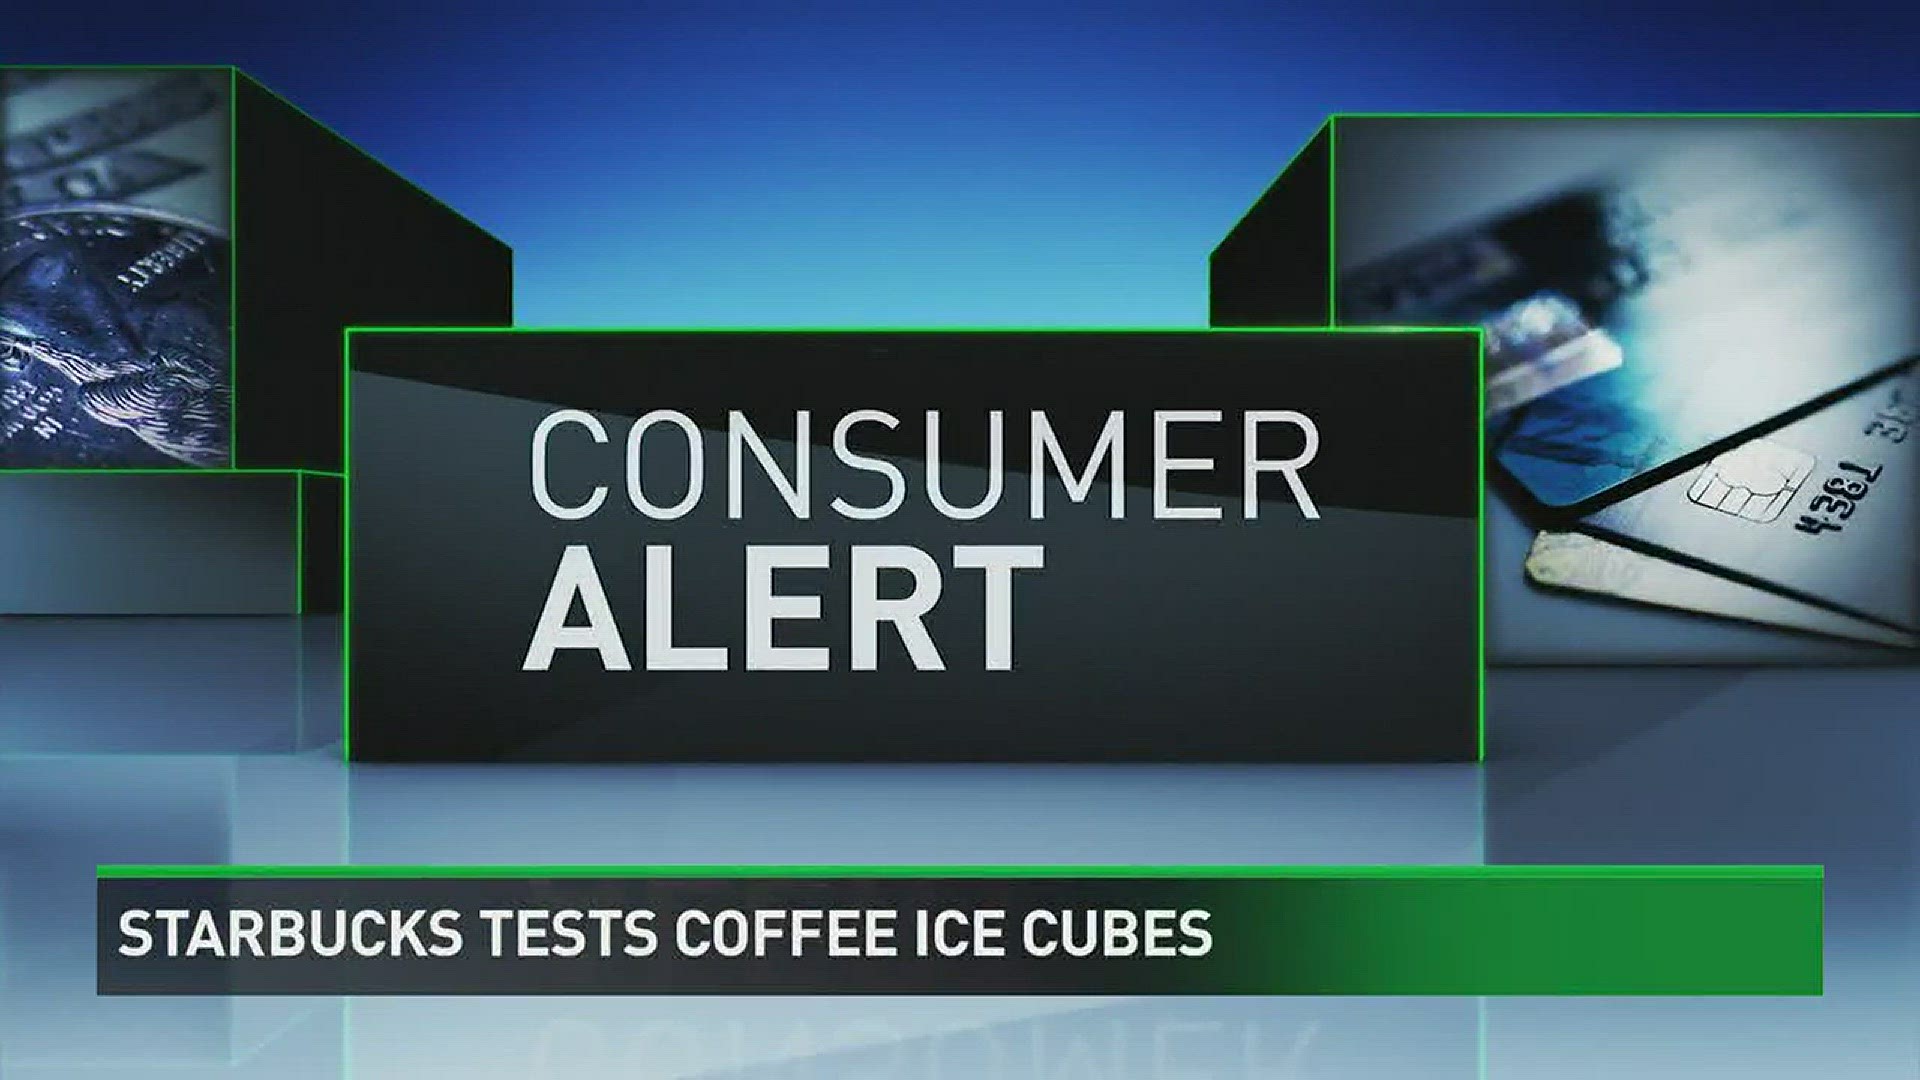 Your next Starbucks cup of Joe may come with an extra jolt - if you add some ice.